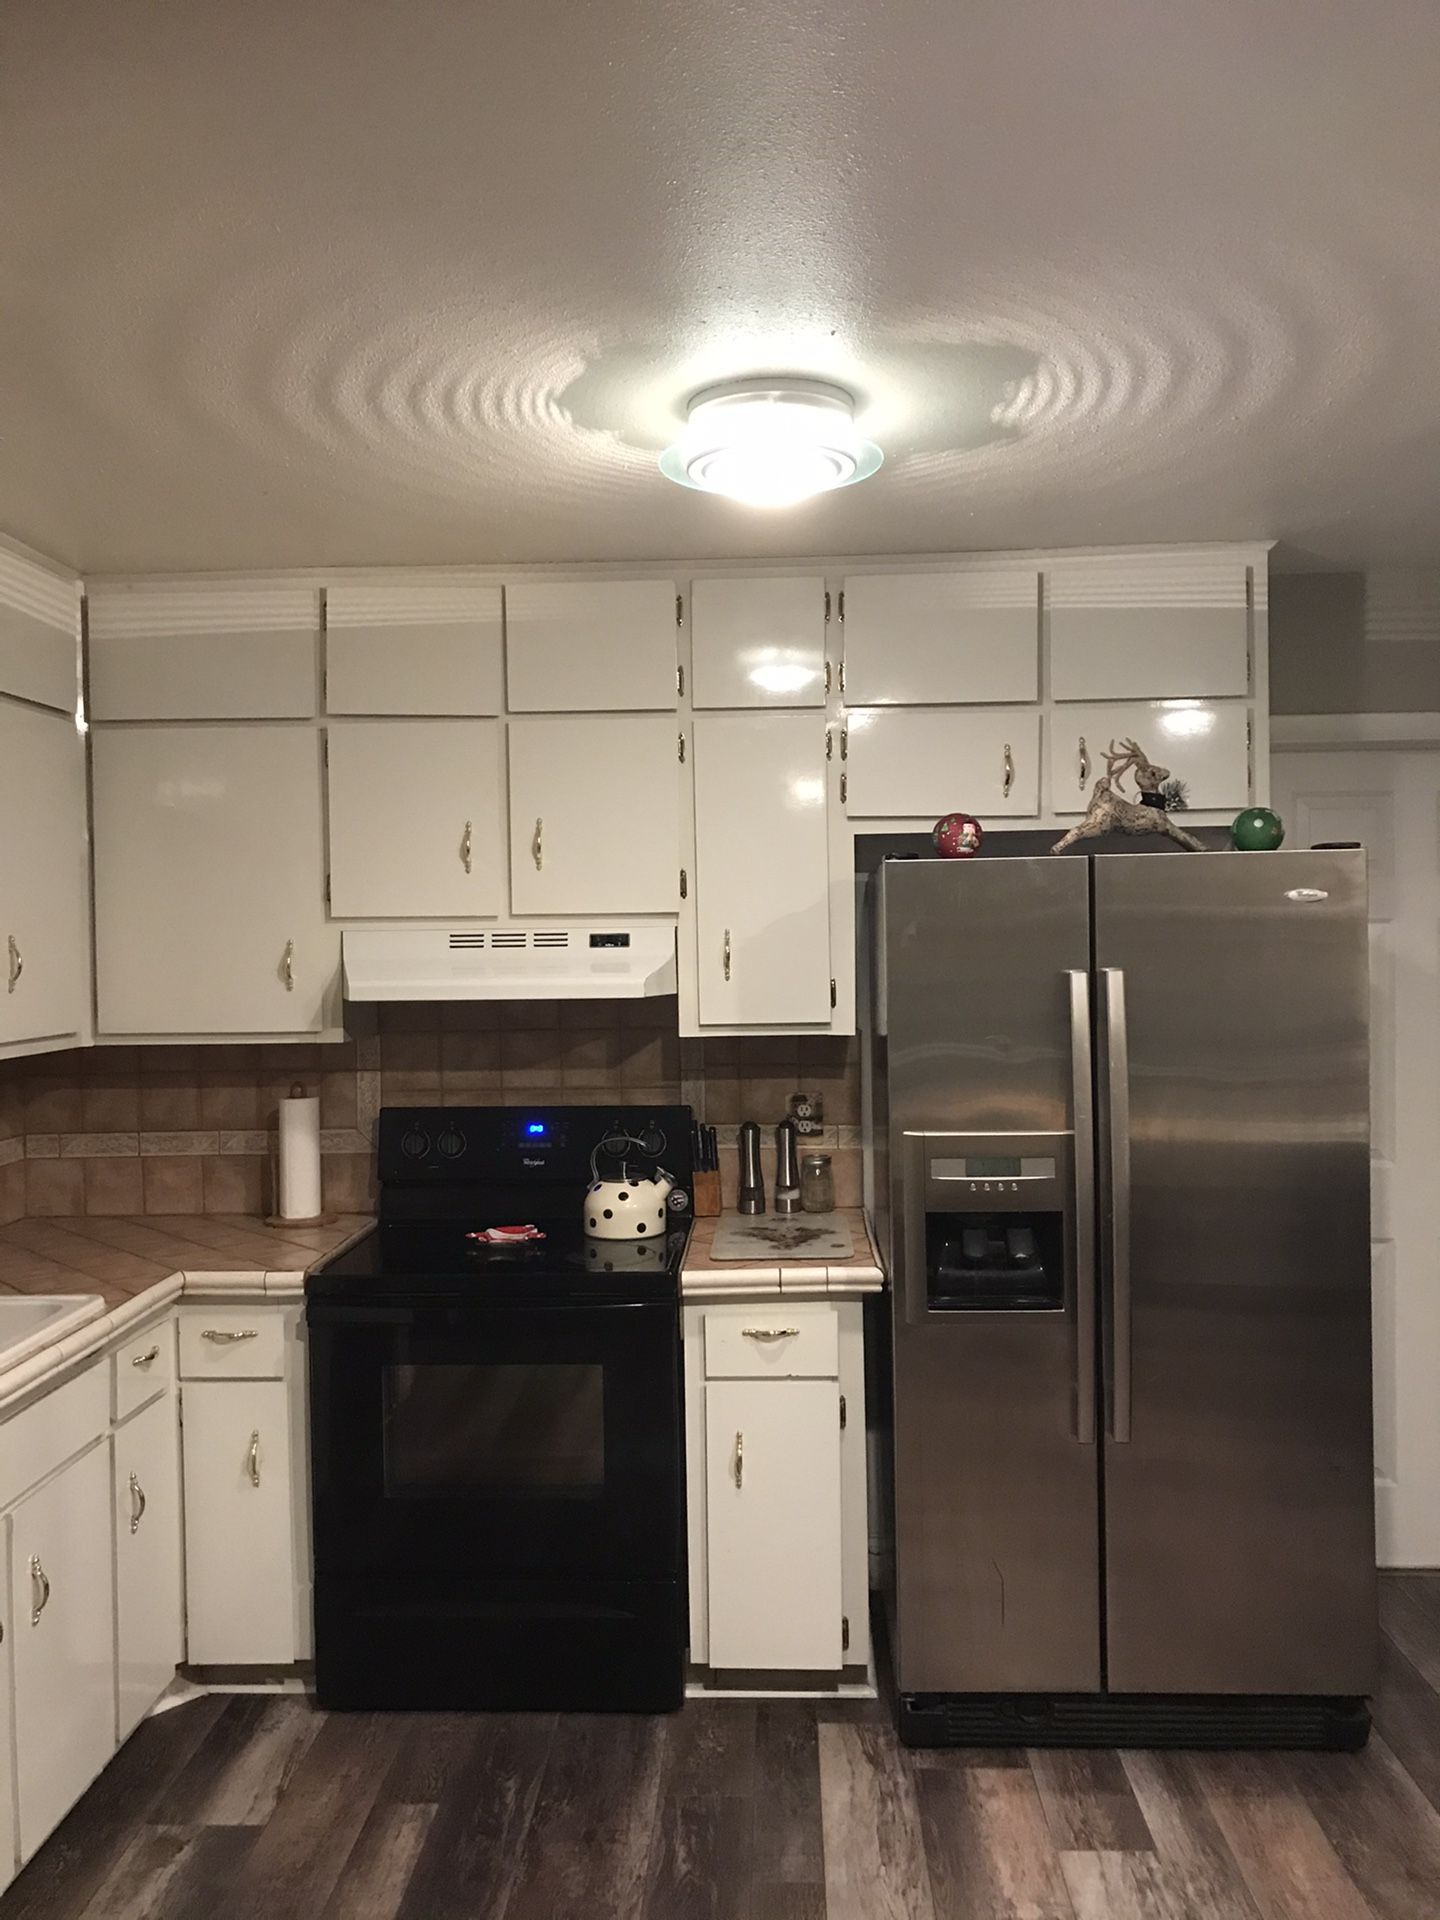 Cabinets And Kitchen Appliancess